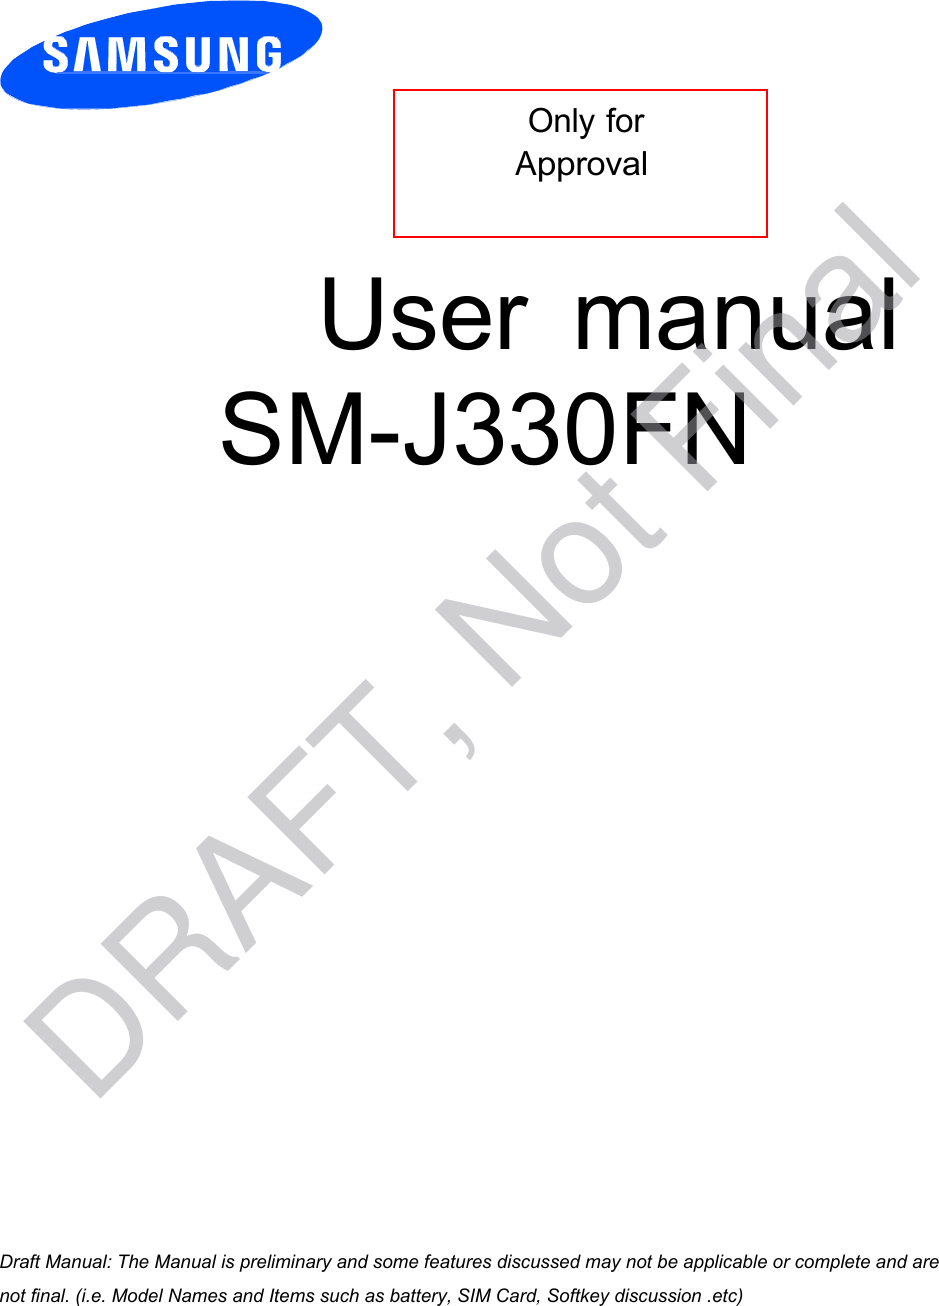  Only for Approval User  manual SM-J330FN a ana  ana  na and  a dd a n  aa   and a n na  d a and   a a  ad  dn DRAFT, Not Final